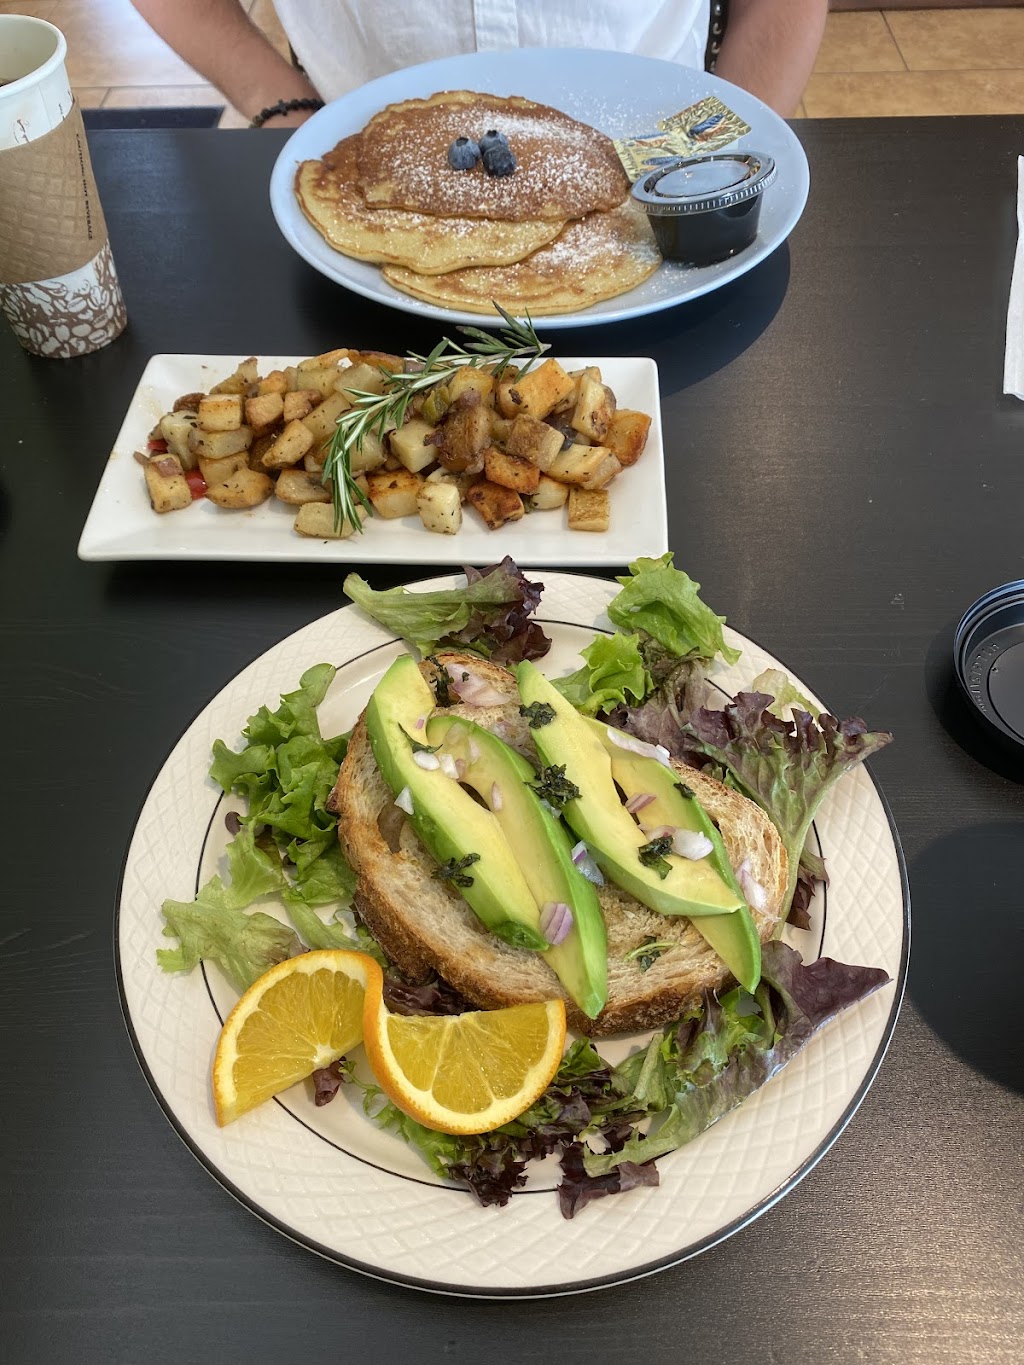 Media Bean Cafe | 204 S Newtown Street Rd, Newtown Square, PA 19073 | Phone: (610) 755-3559